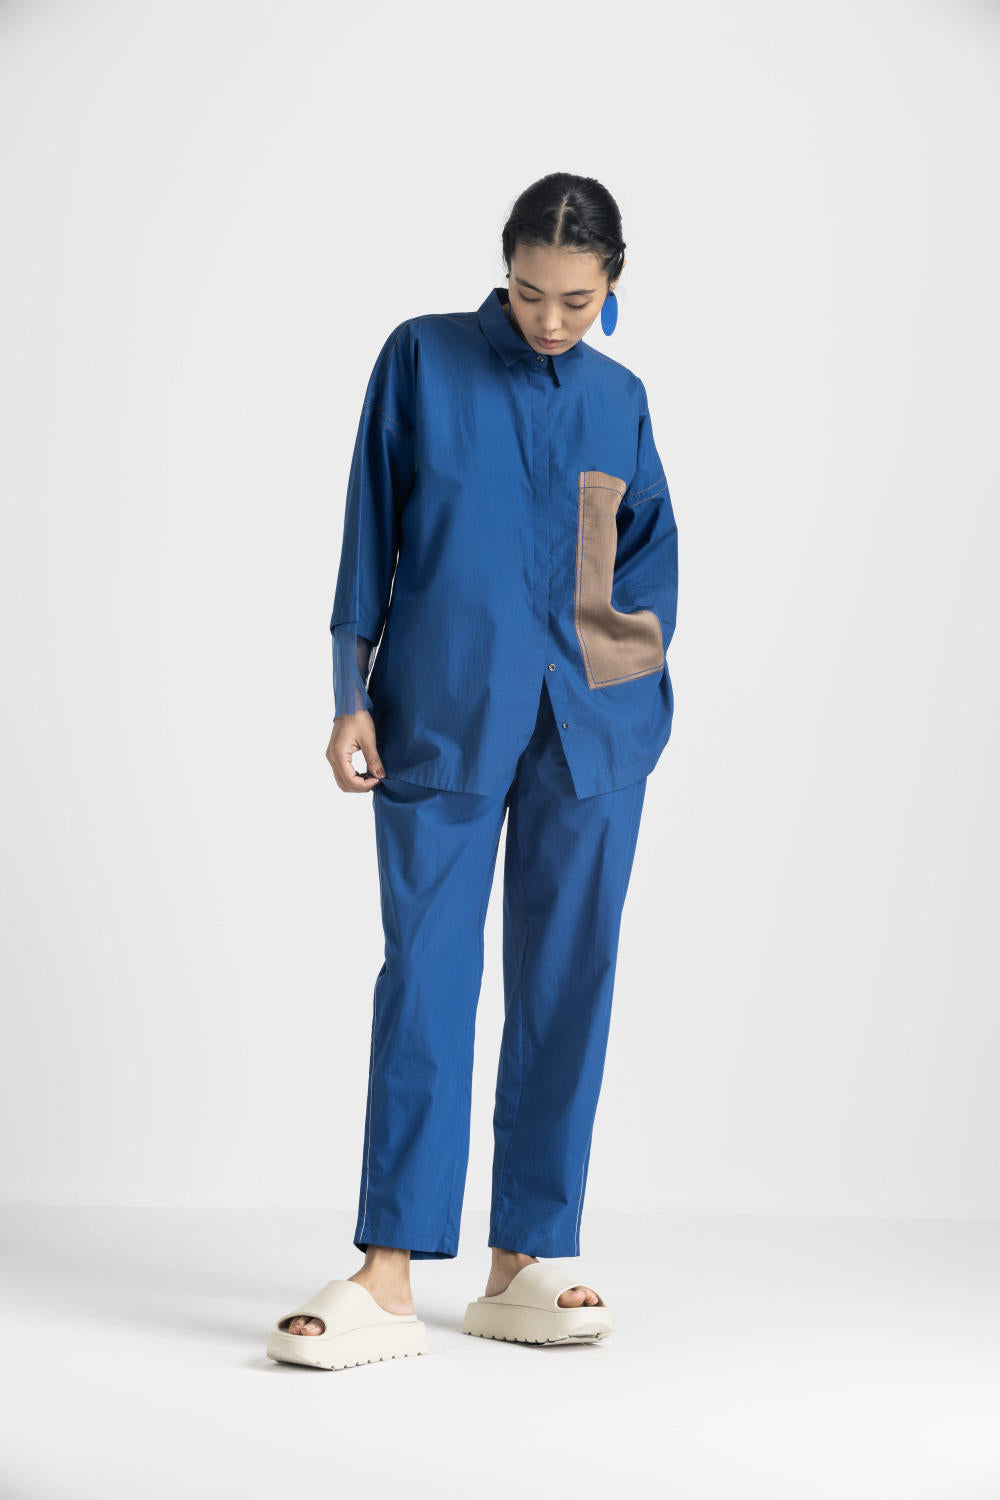 CONTRAST DETAIL SHIRT CO ORD - ELECTRIC BLUE